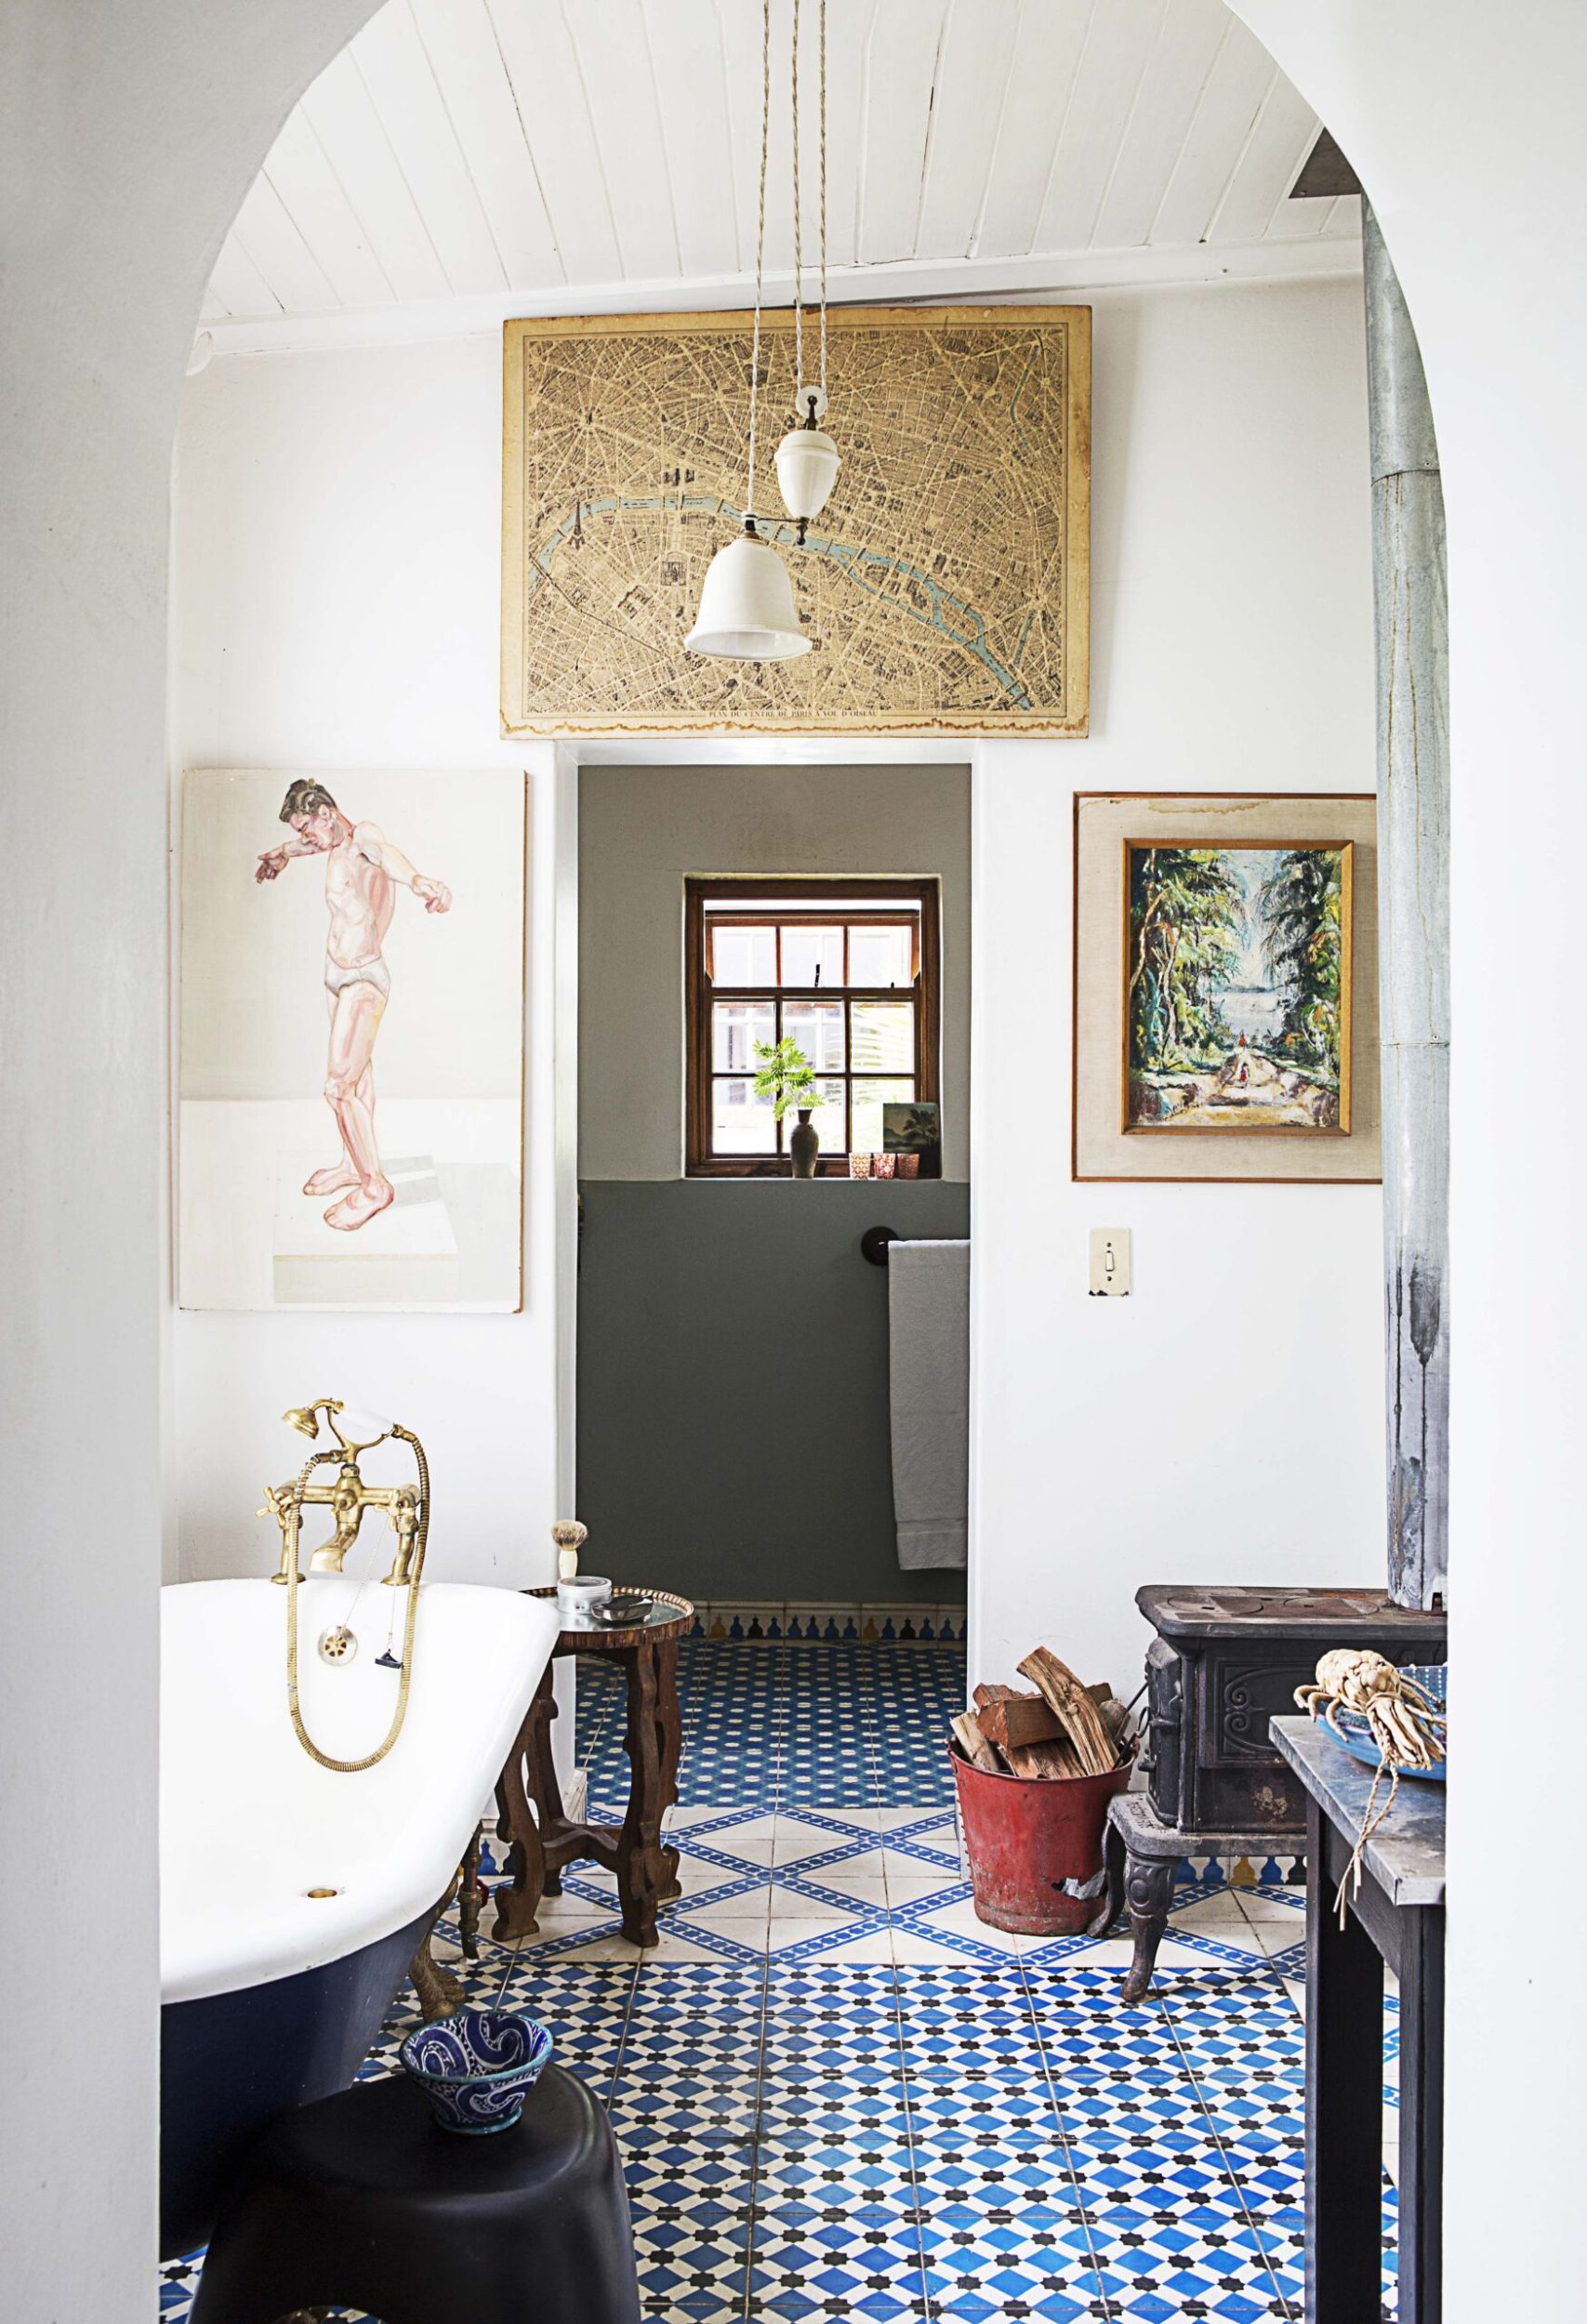 Bathroom with tall arched doors,  a blue clawfoot tub, blue and white geometric floor tiles